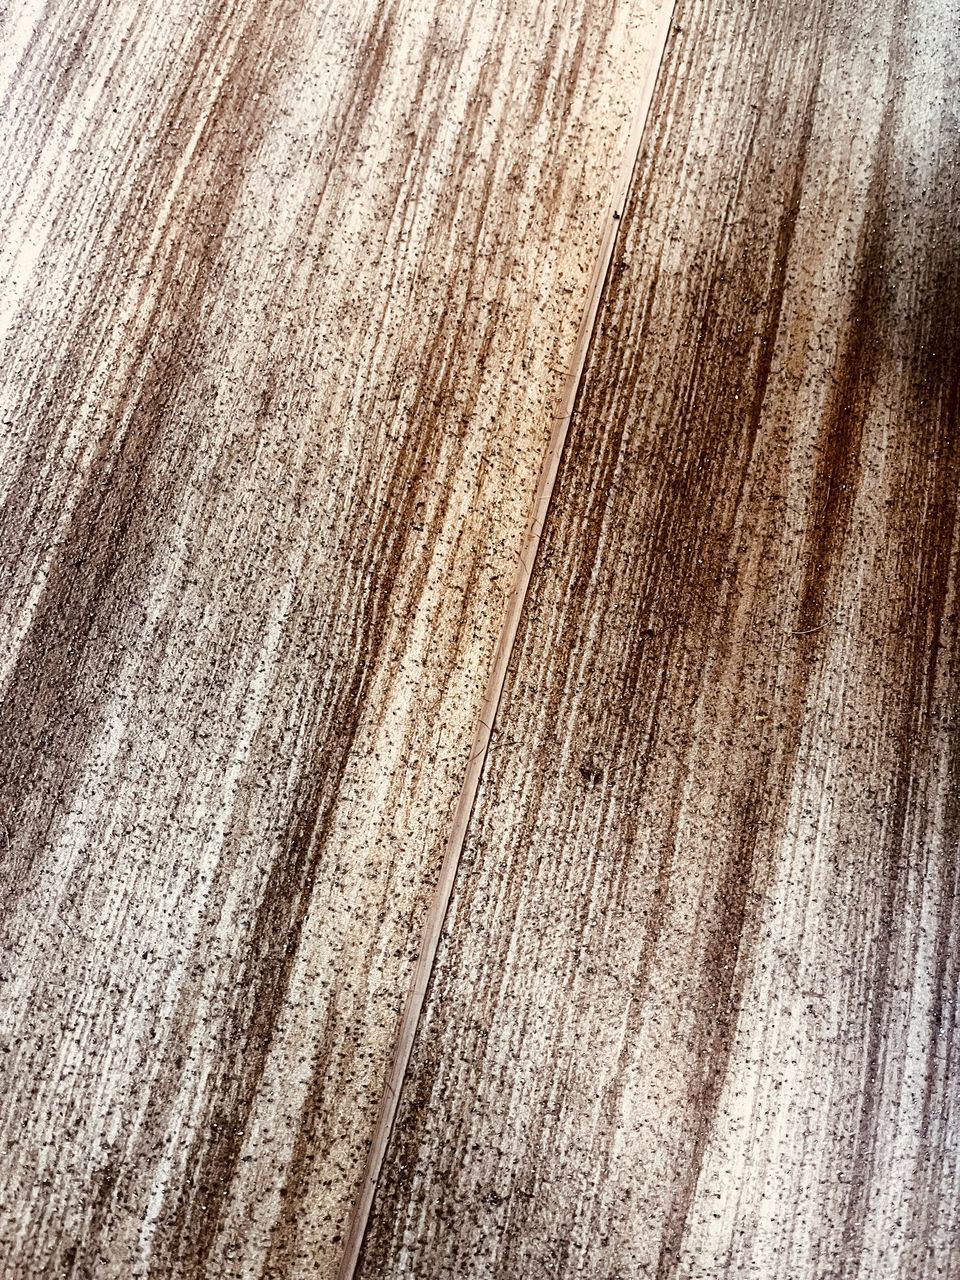 full frame, backgrounds, pattern, wood, textured, no people, brown, floor, flooring, close-up, laminate flooring, wood flooring, nature, day, hardwood, high angle view, soil, rough, outdoors, wood grain